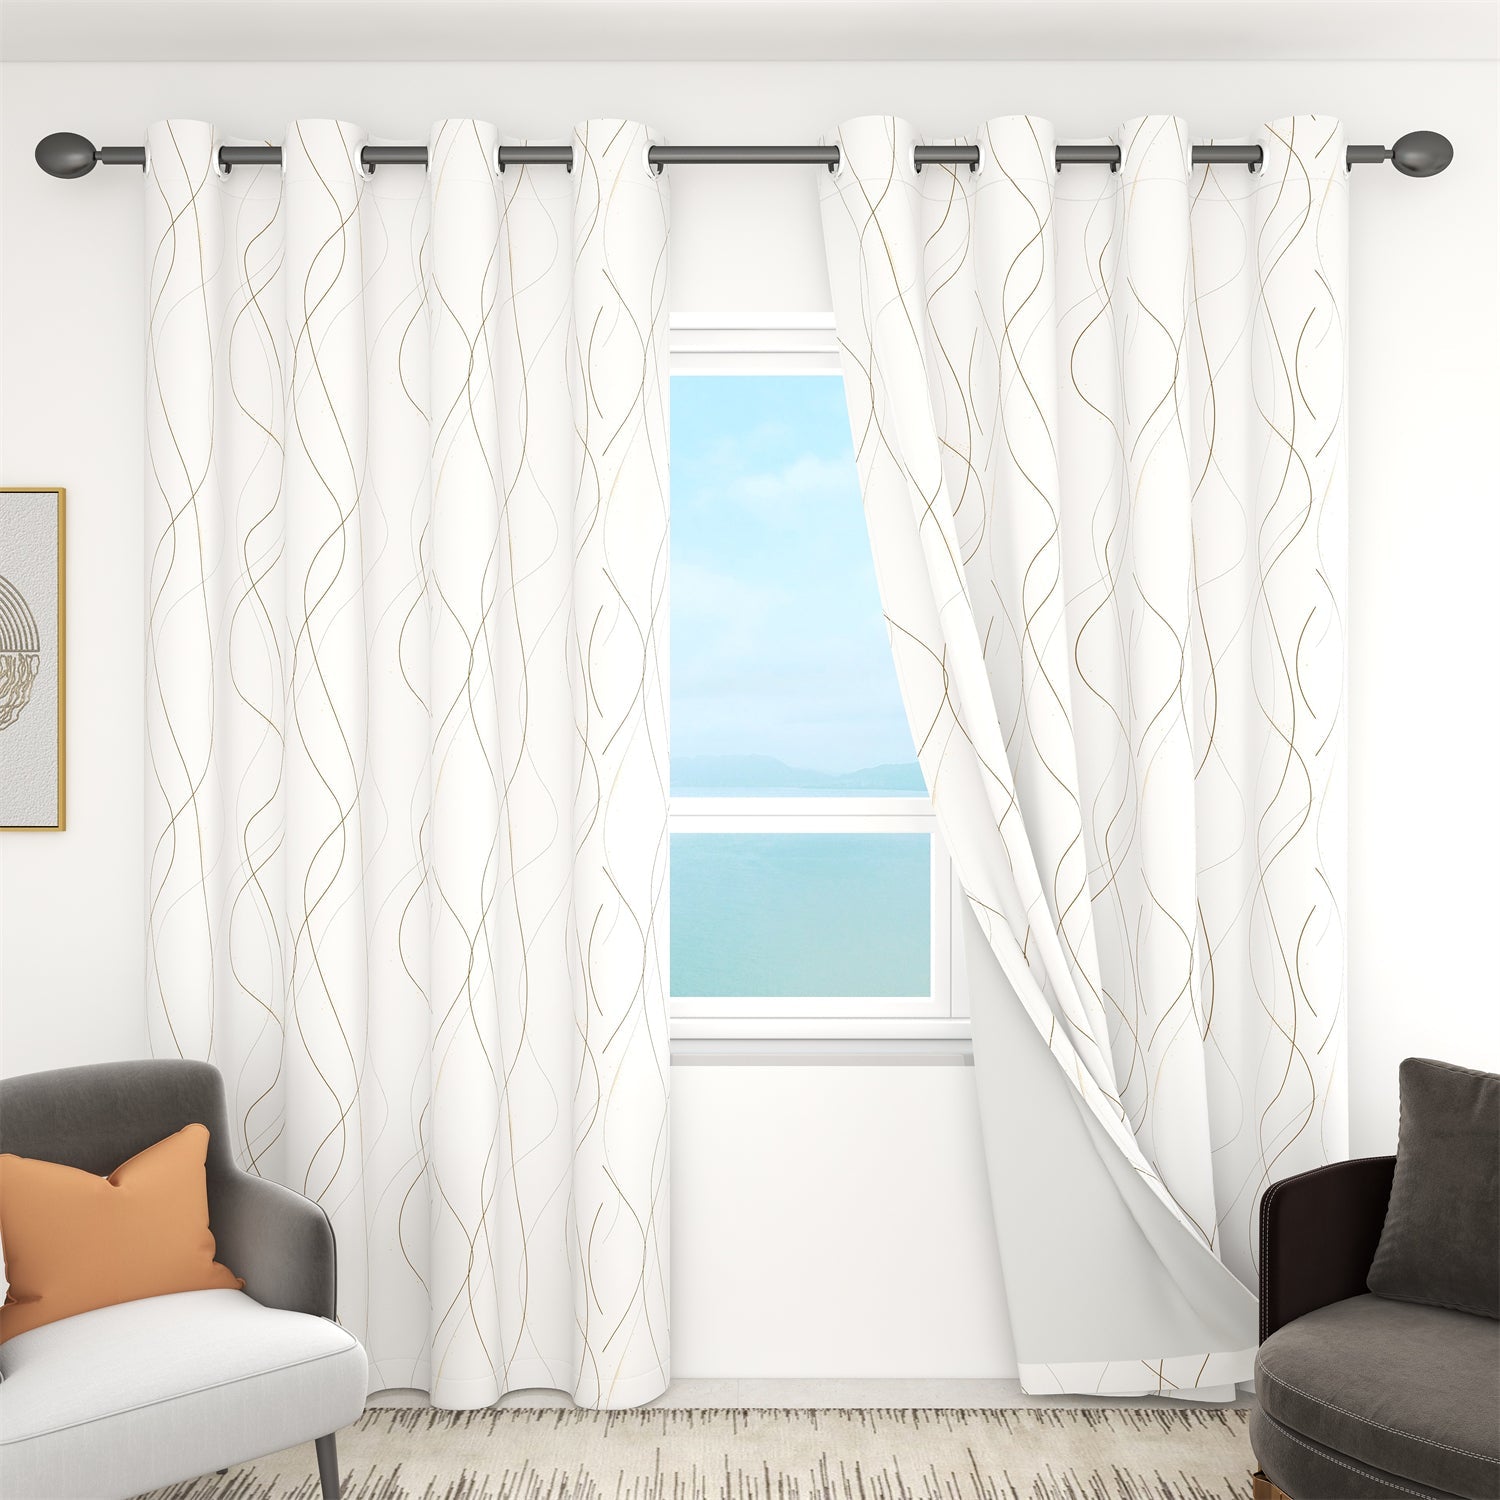 Silver Grommet Blackout Curtains For Living Room And Bedroom 2 Panels KGORGE Store